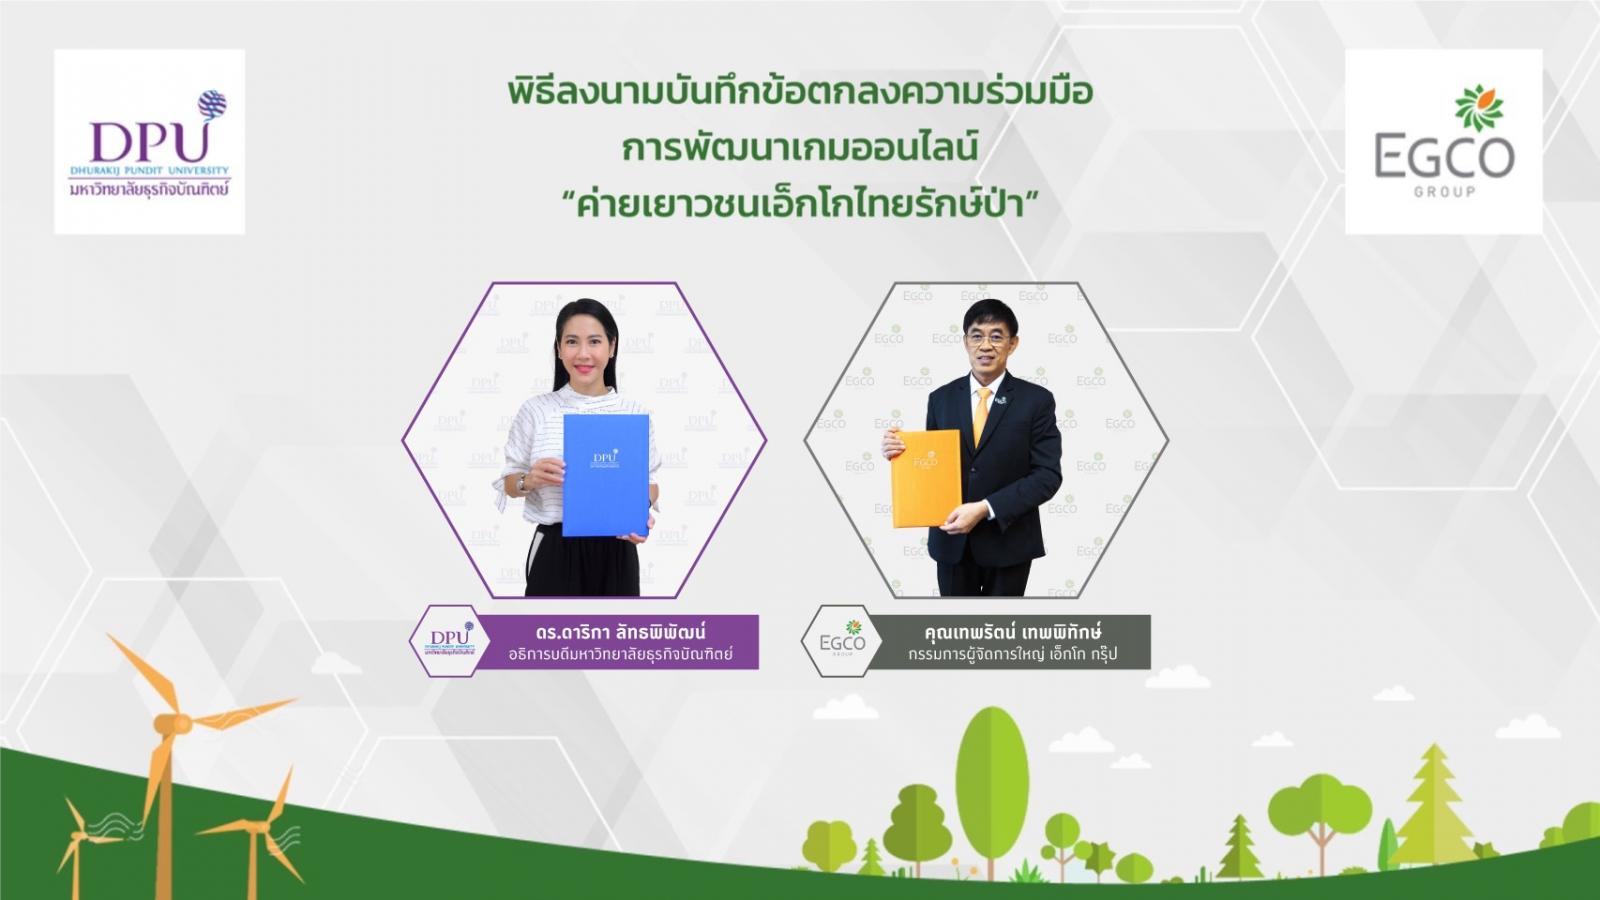 EGCO Group joins hands with dpu to bring “EGCO Thai Rak Pa Youth Camp” to the online gaming world. Promoting learning about conservation of watershed forests in a new normal way